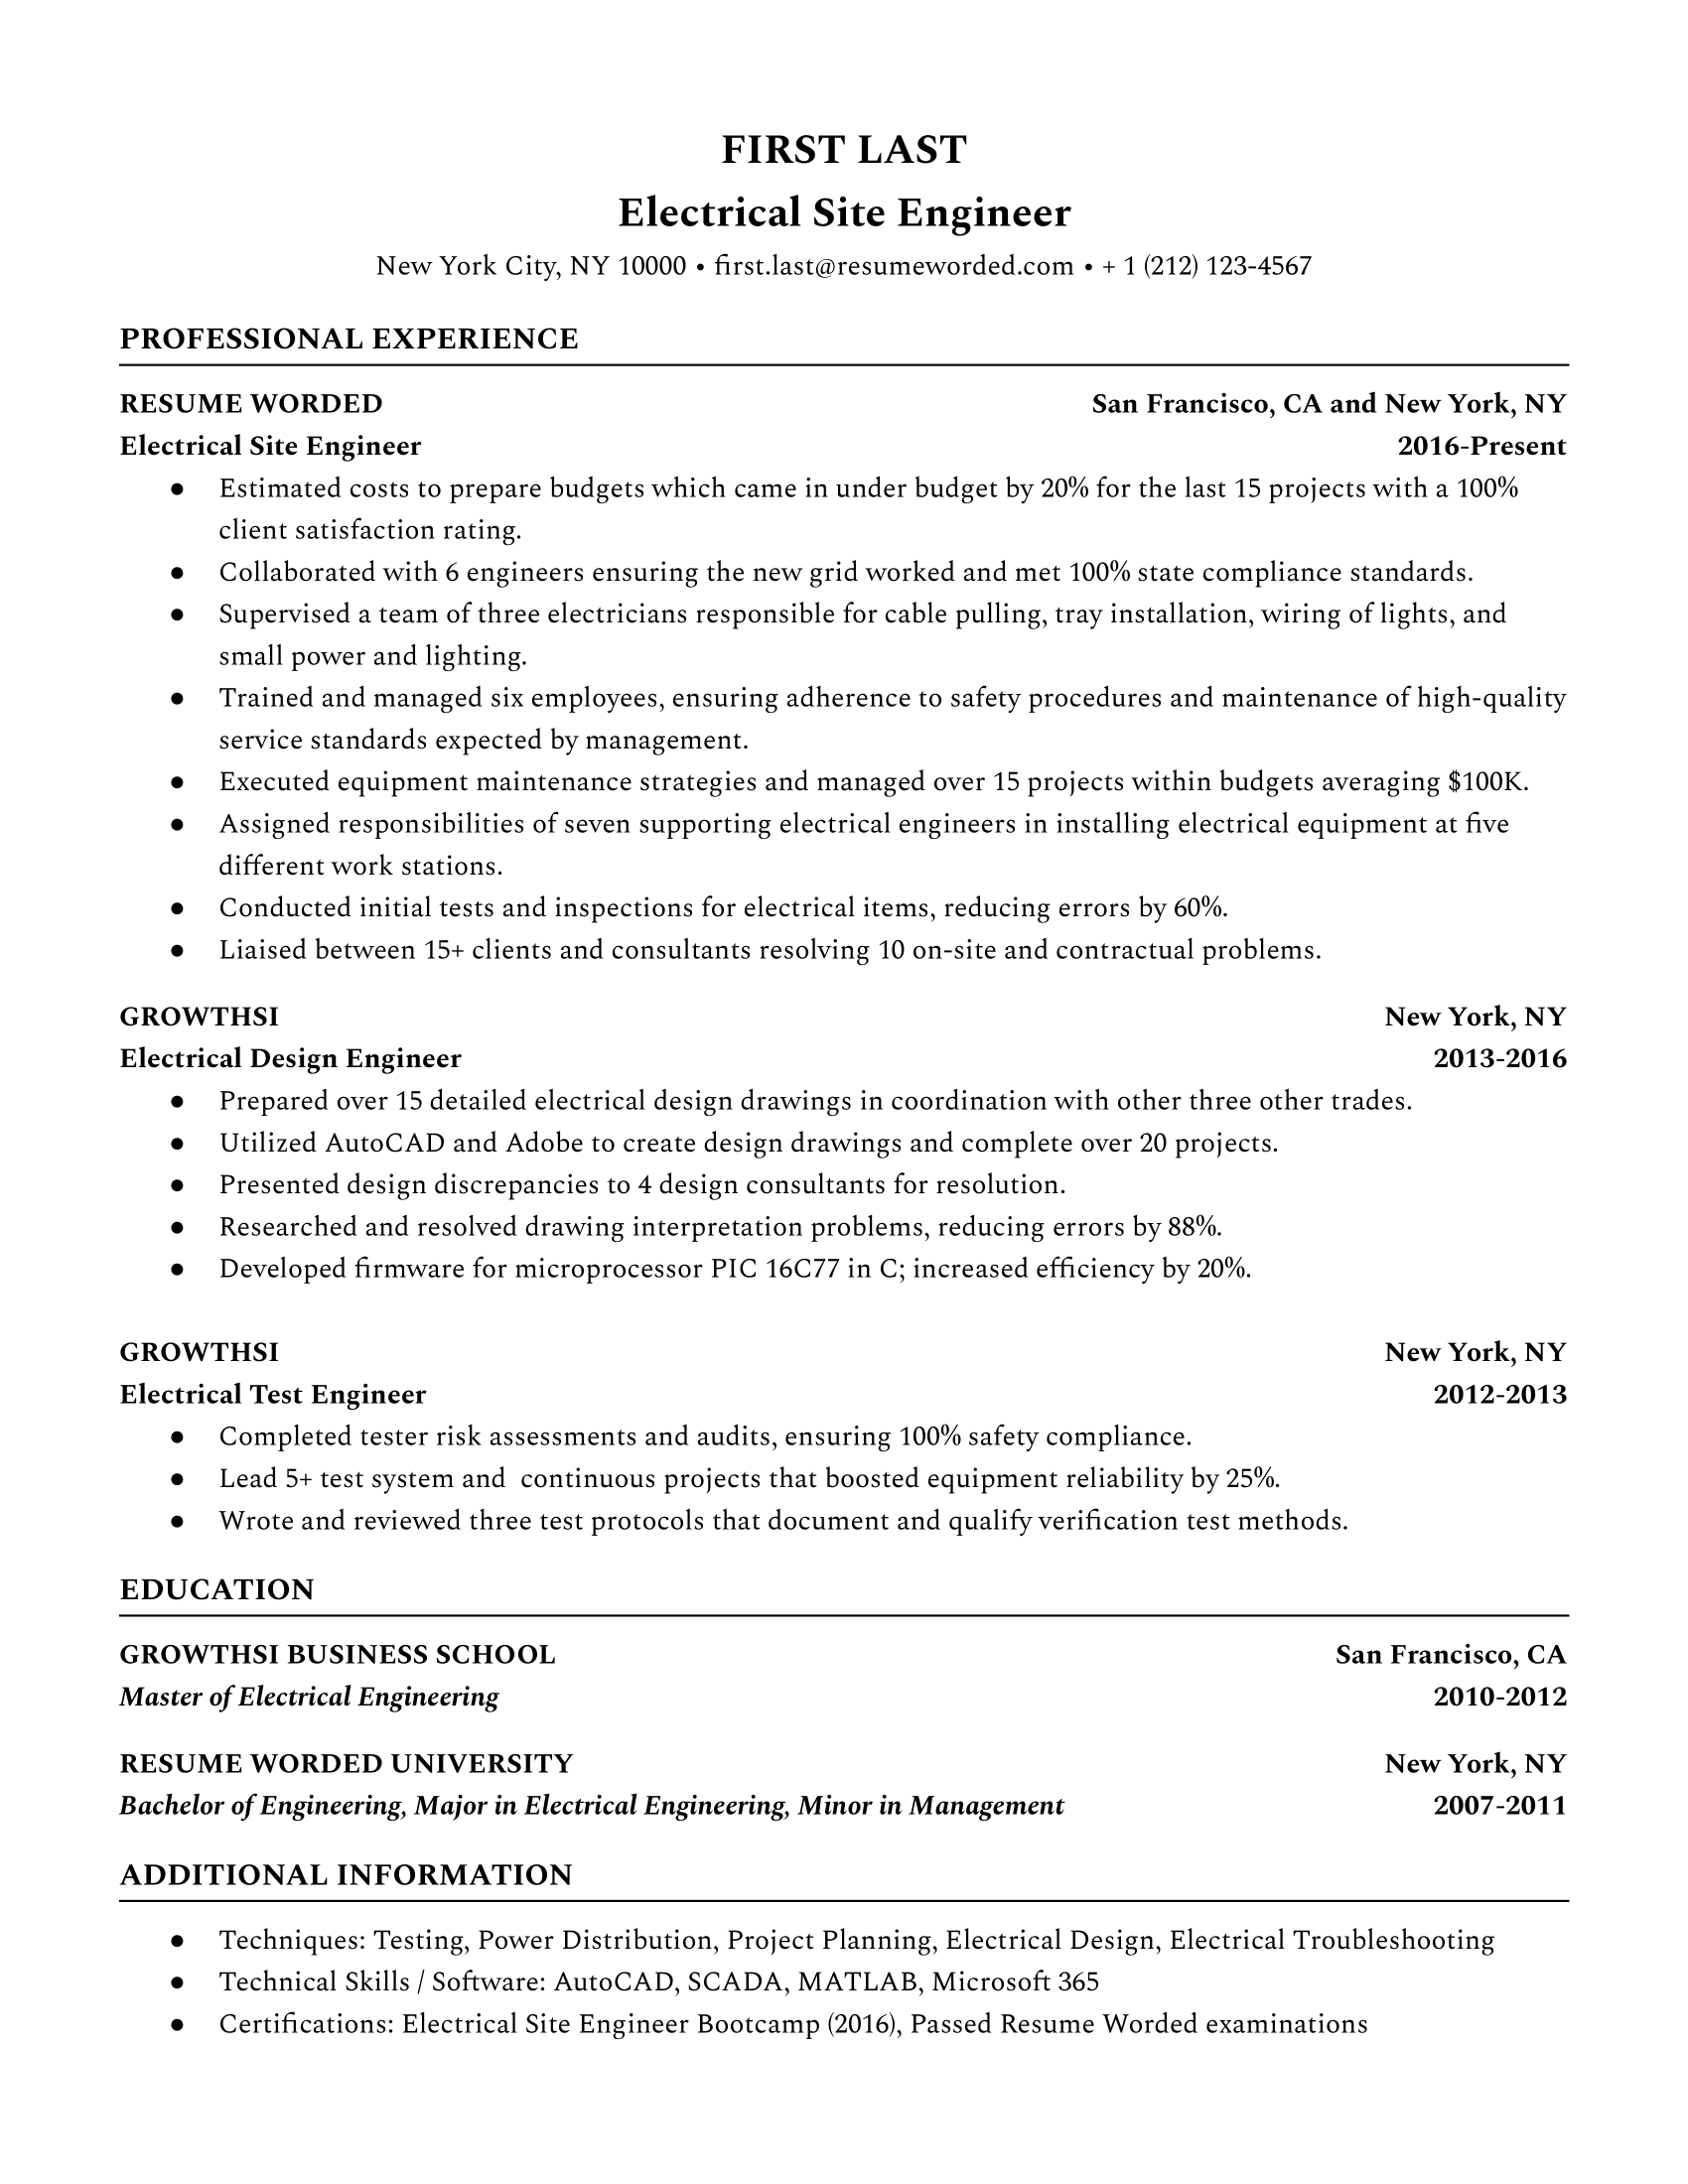 A well-structured CV for an Electrical Site Engineer role.